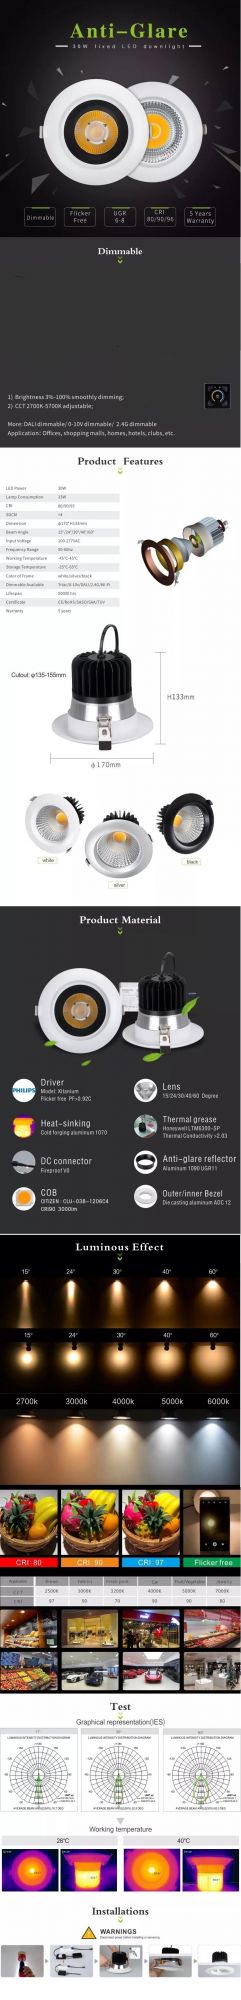 Standard Simple Design 30W Fixed LED Downlight